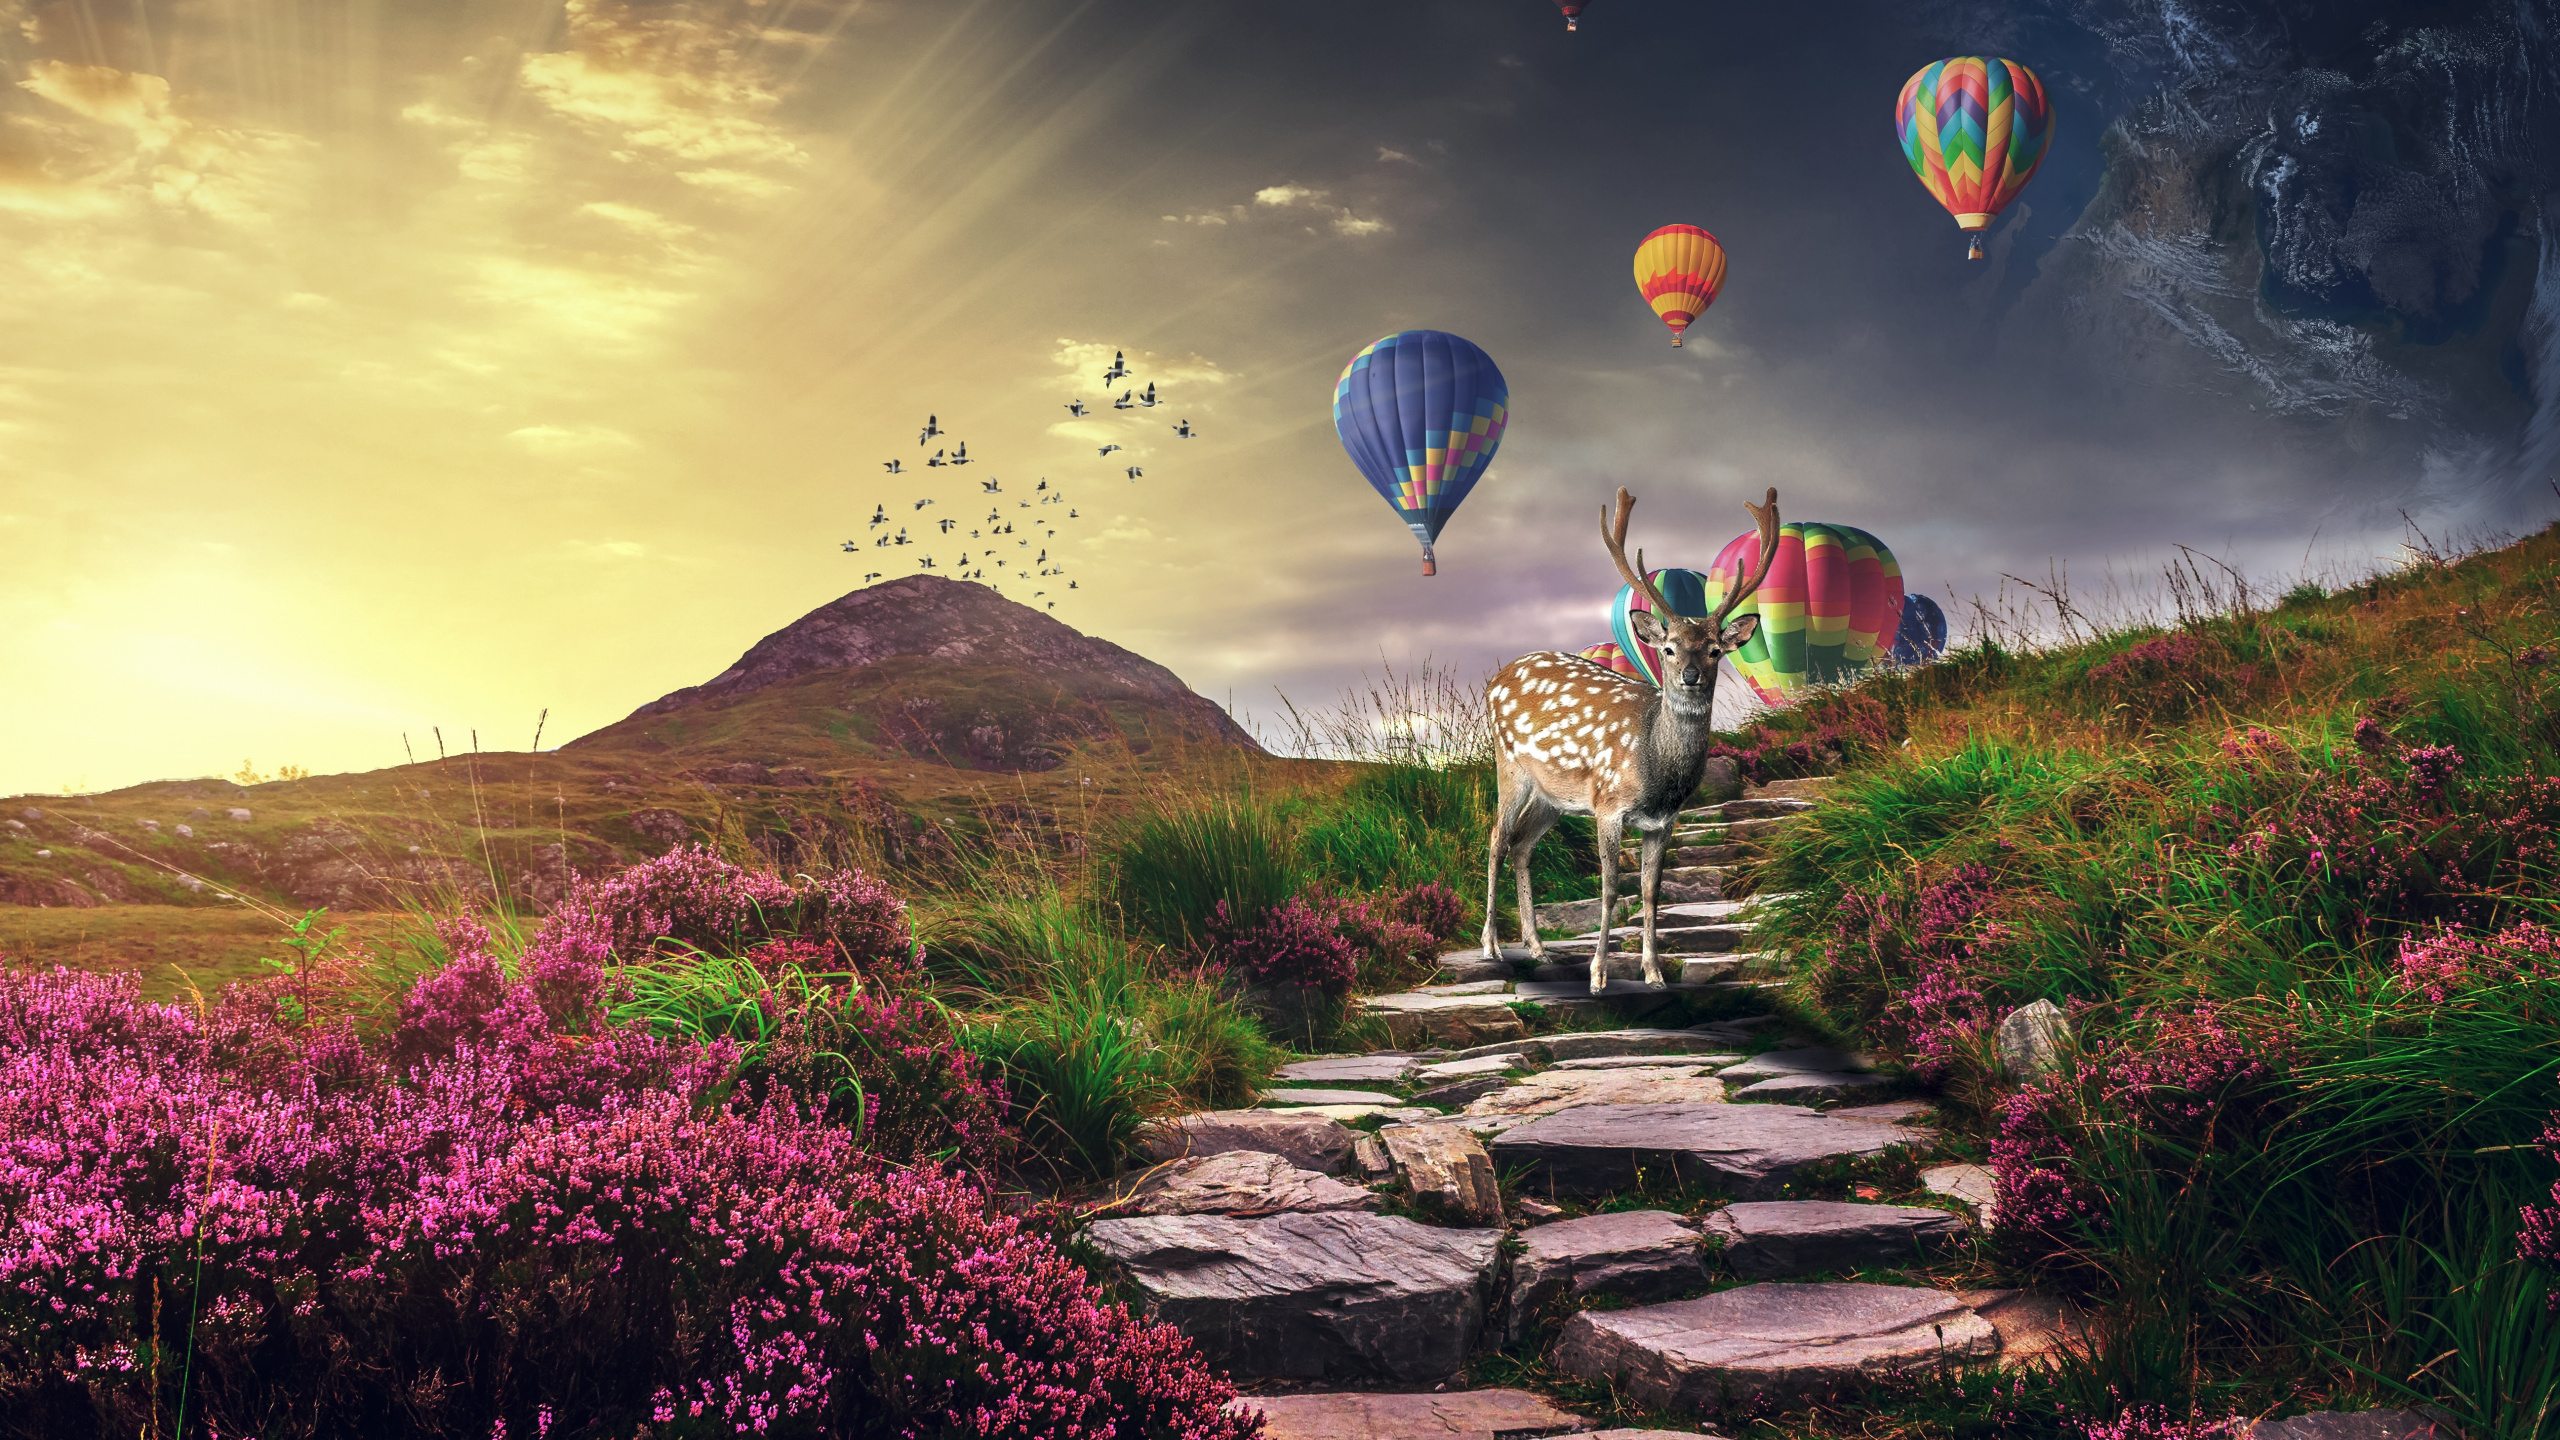 Hot Air Balloons on Sky Above Purple Flower Field. Wallpaper in 2560x1440 Resolution